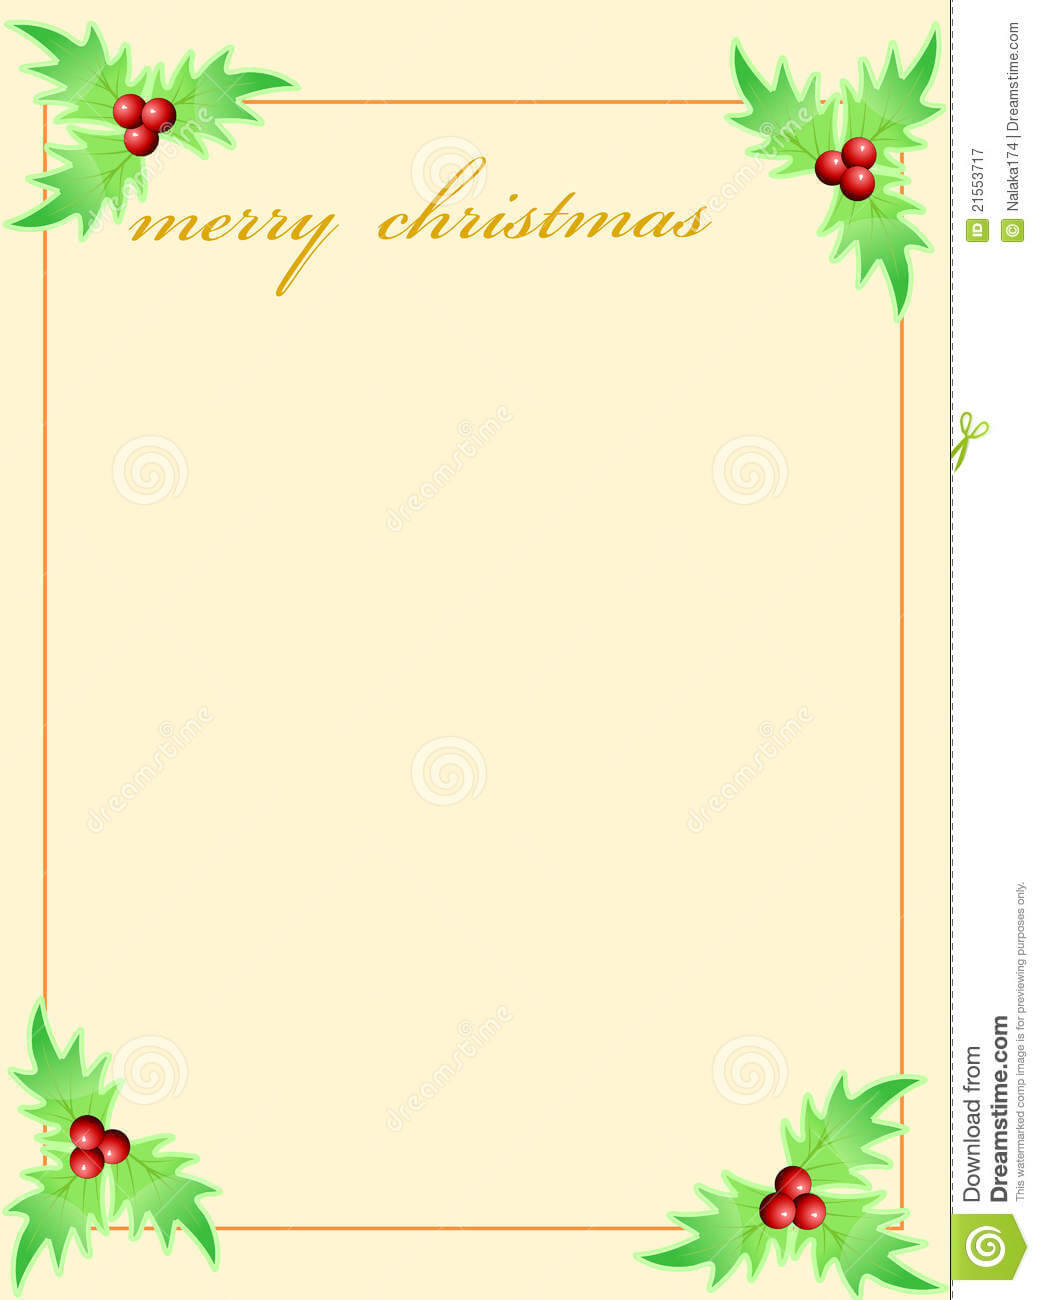 16 Holiday Greeting Card Template Images – Free Christmas Regarding Blank Christmas Card Templates Free